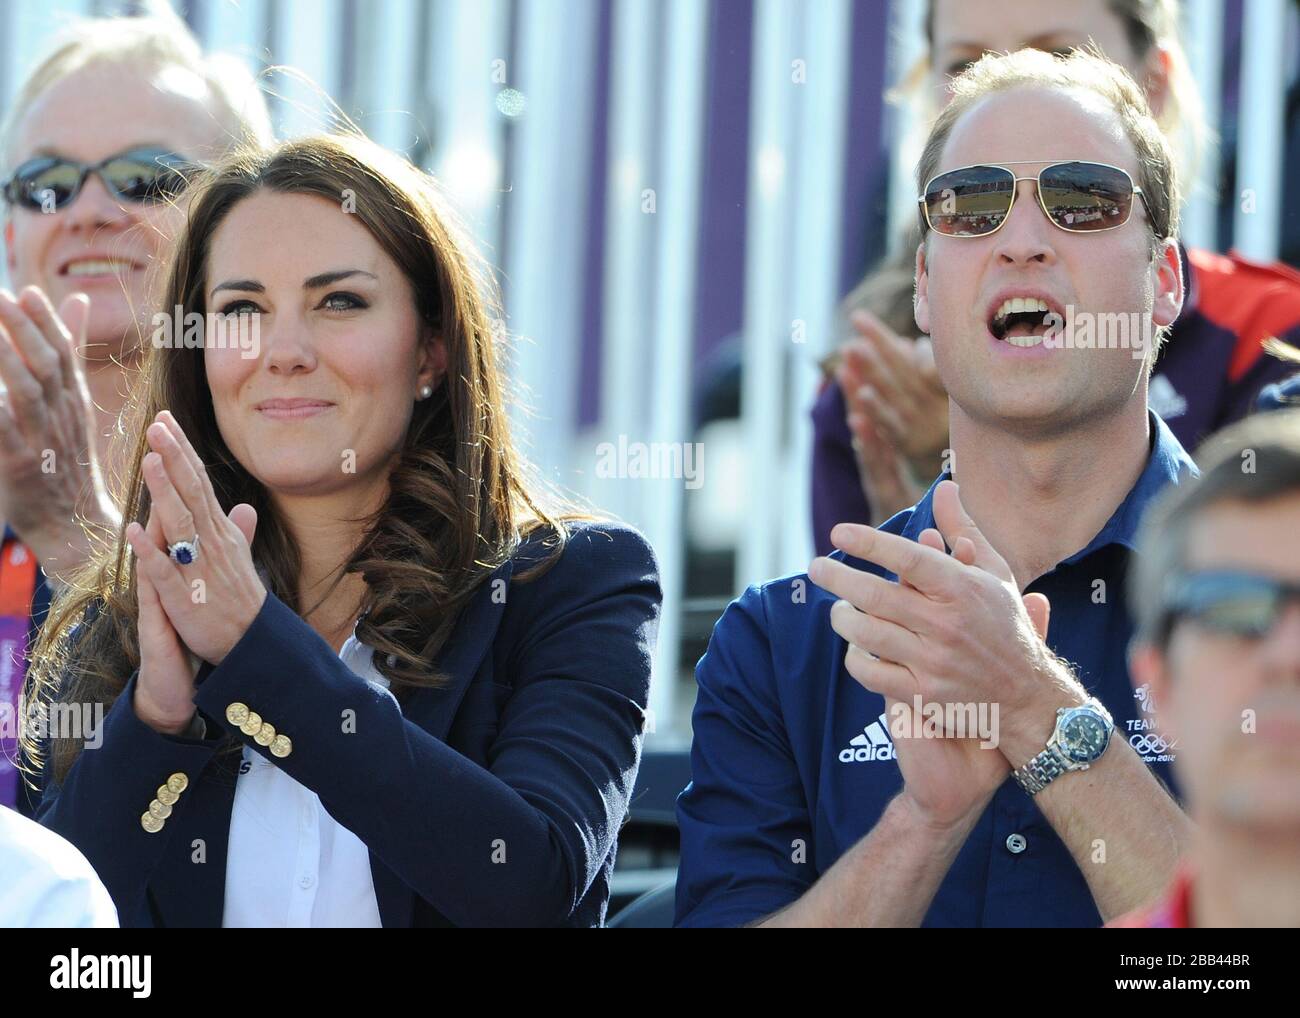 The Duke and Duchess of Cambridge cheer Zara Phillips as she enters the Arena during the Cross Country Phase of The Eventing at Greenwich Park, on the third day of the London 2012 Olympics. Stock Photo